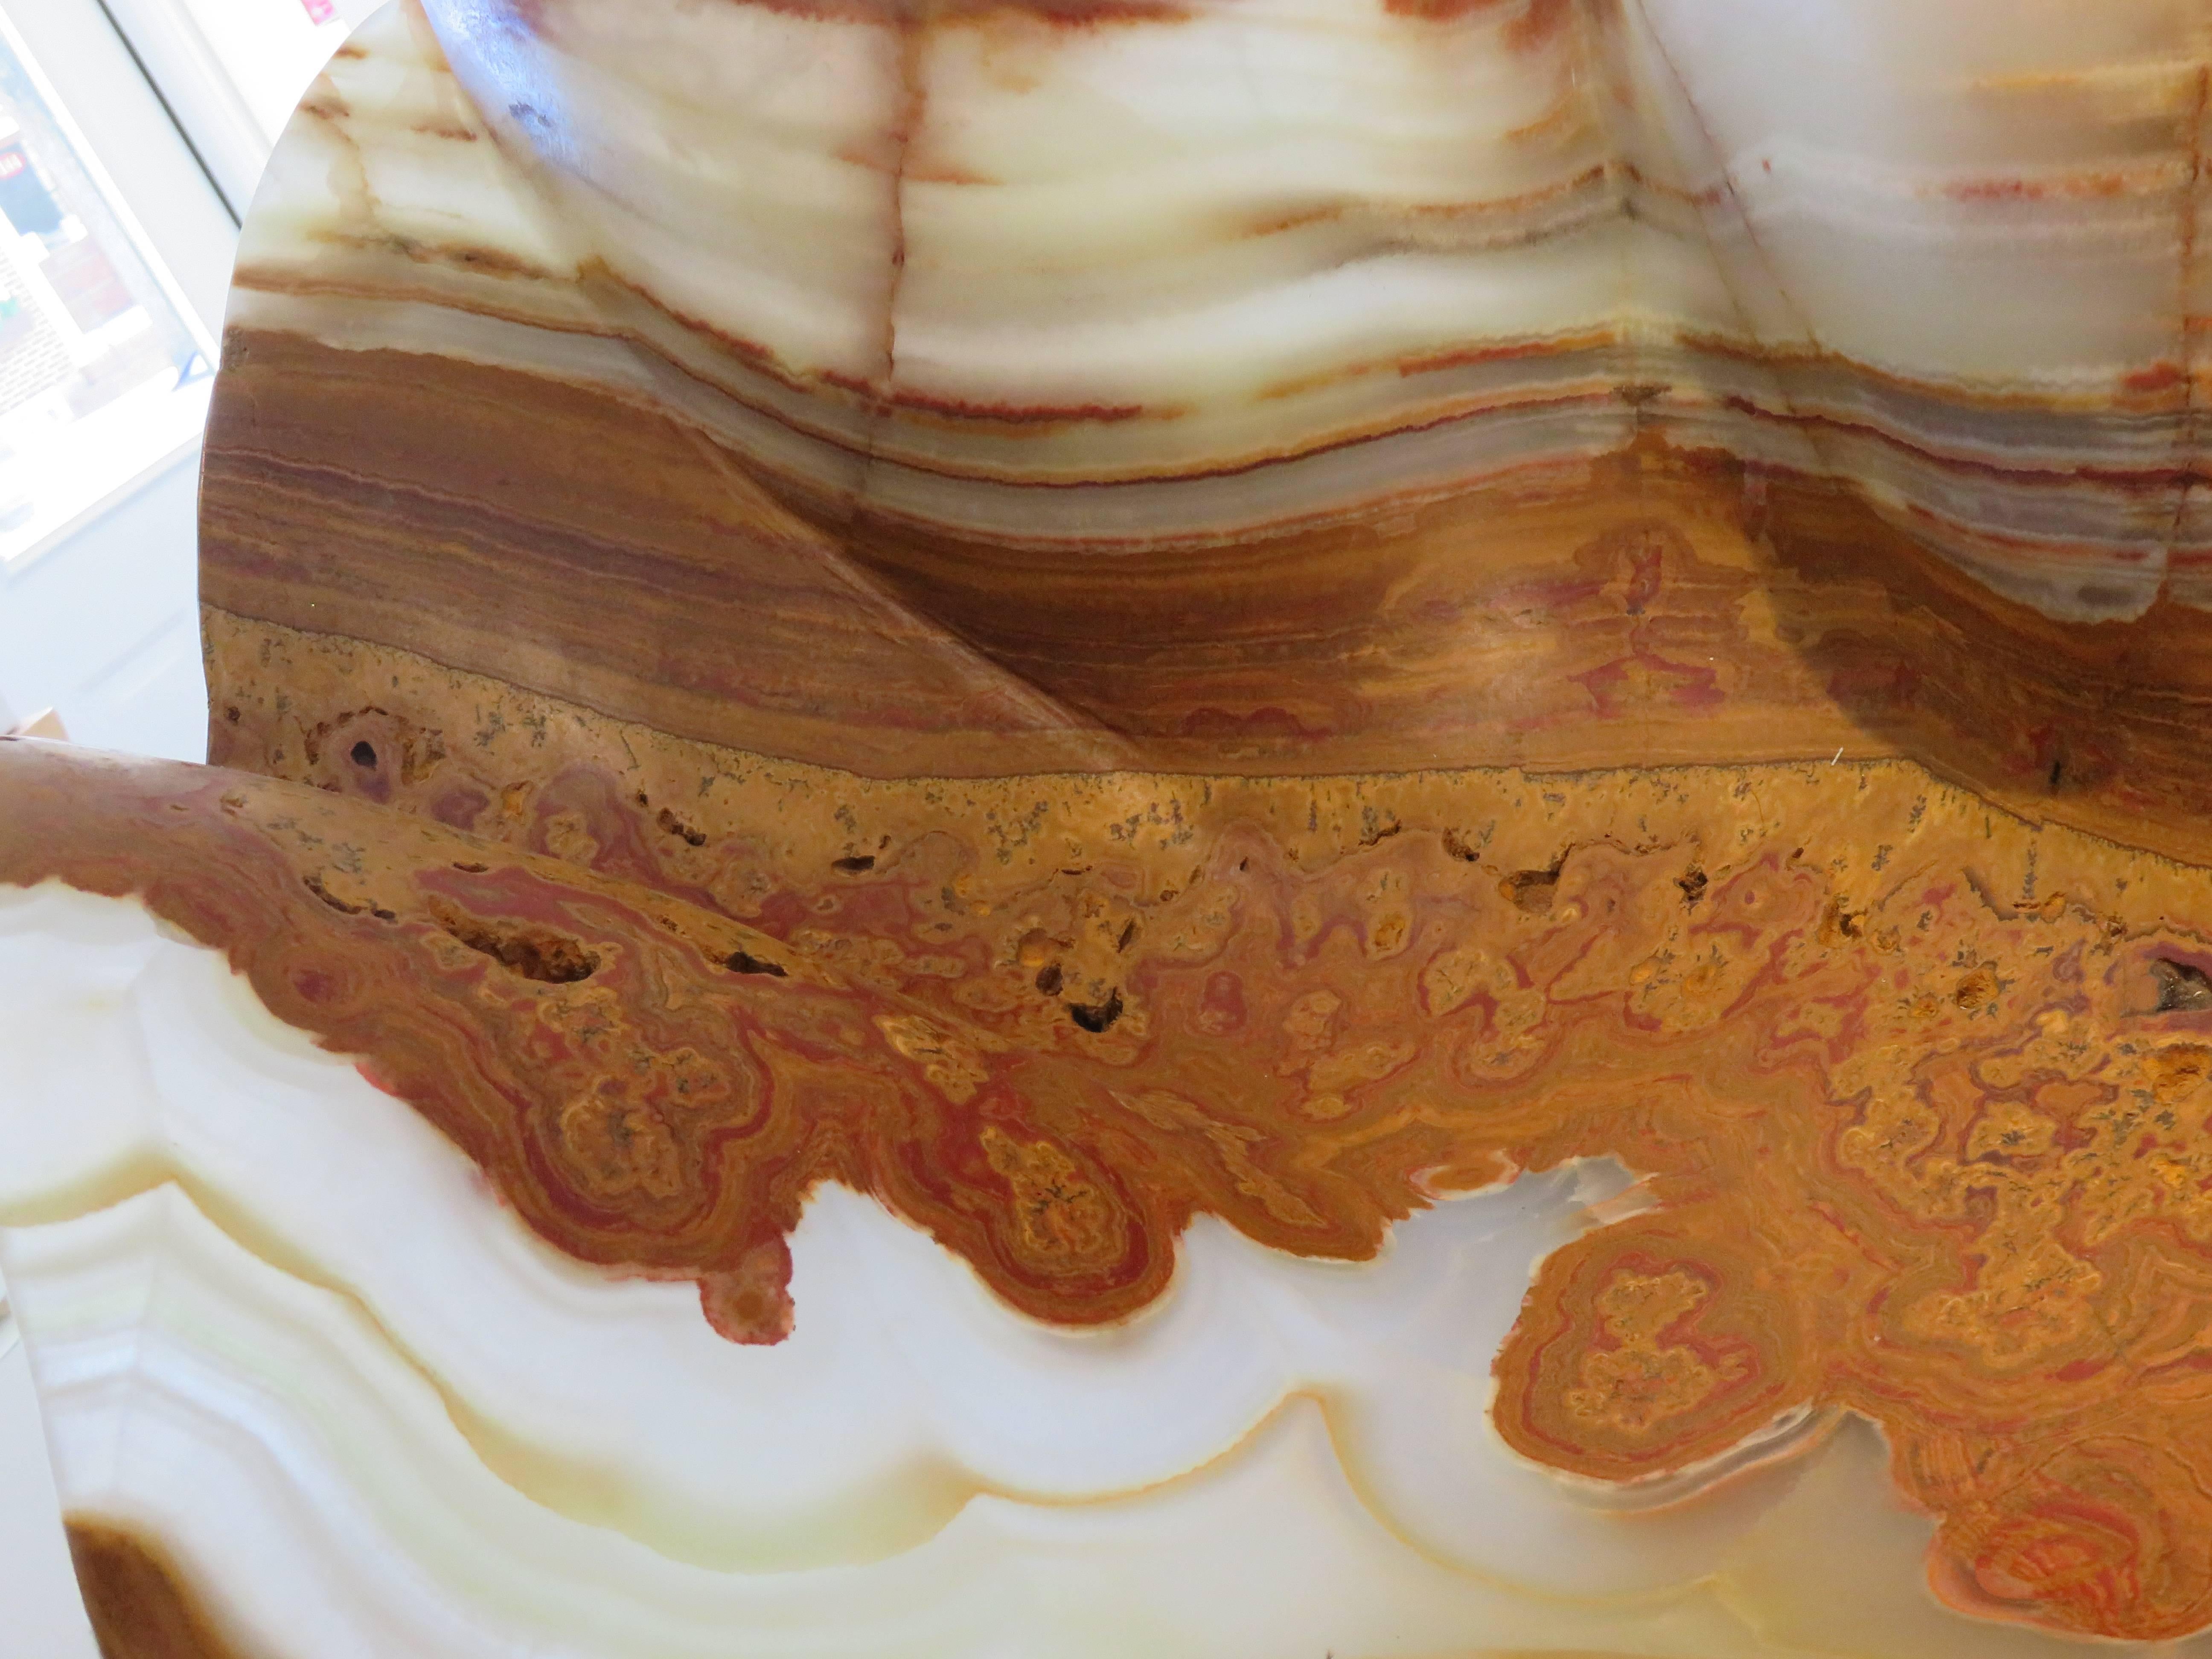 Hand-Crafted Massive Sculptural Shell Form Onyx Bowl/Vessel